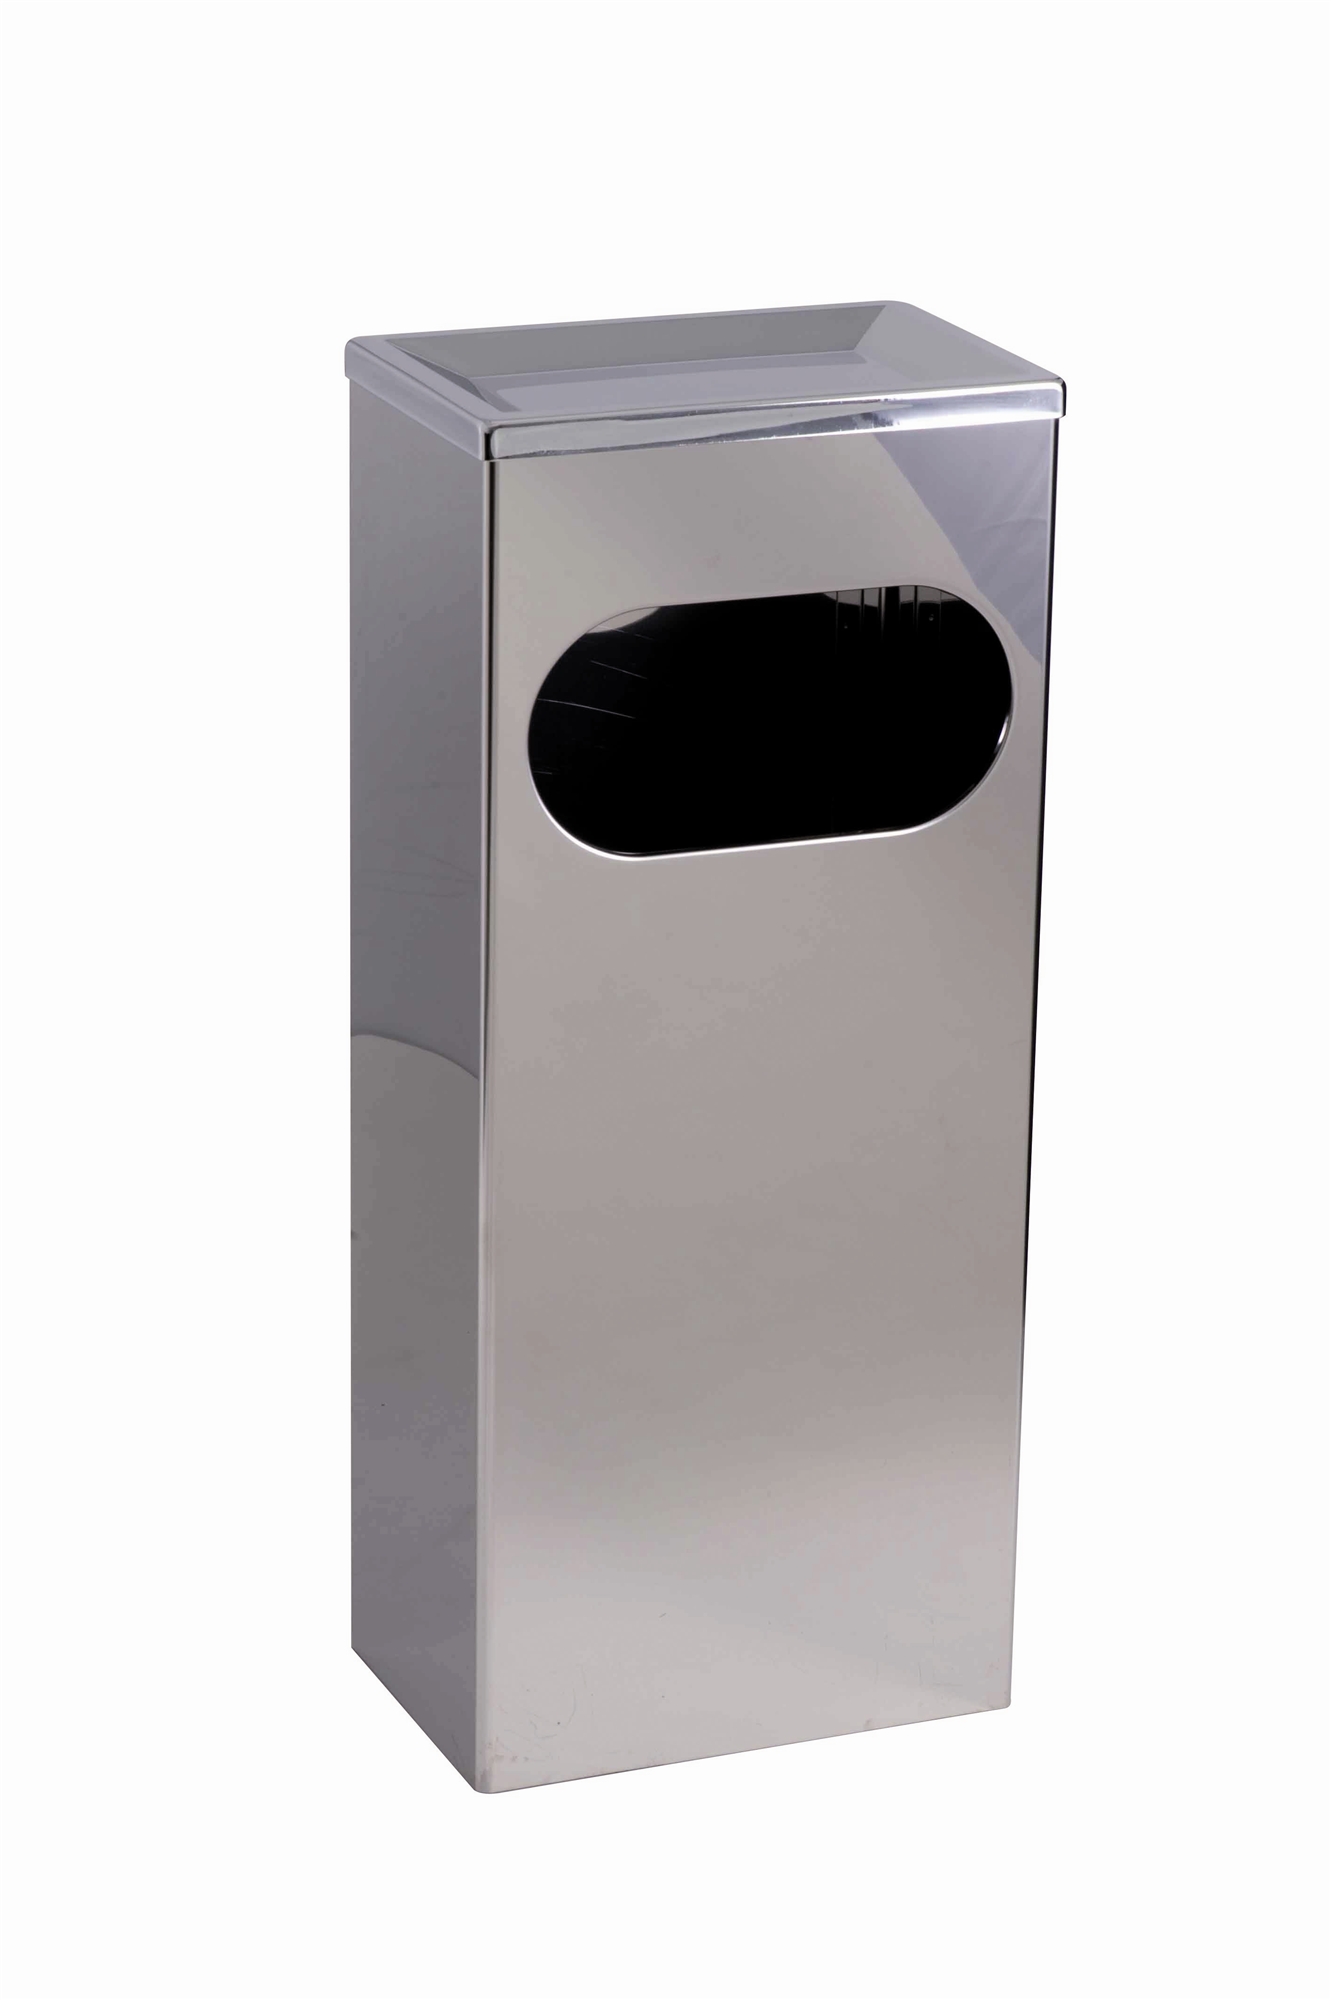 Wall mounted stainless steel bin 25L front opening - Voussert